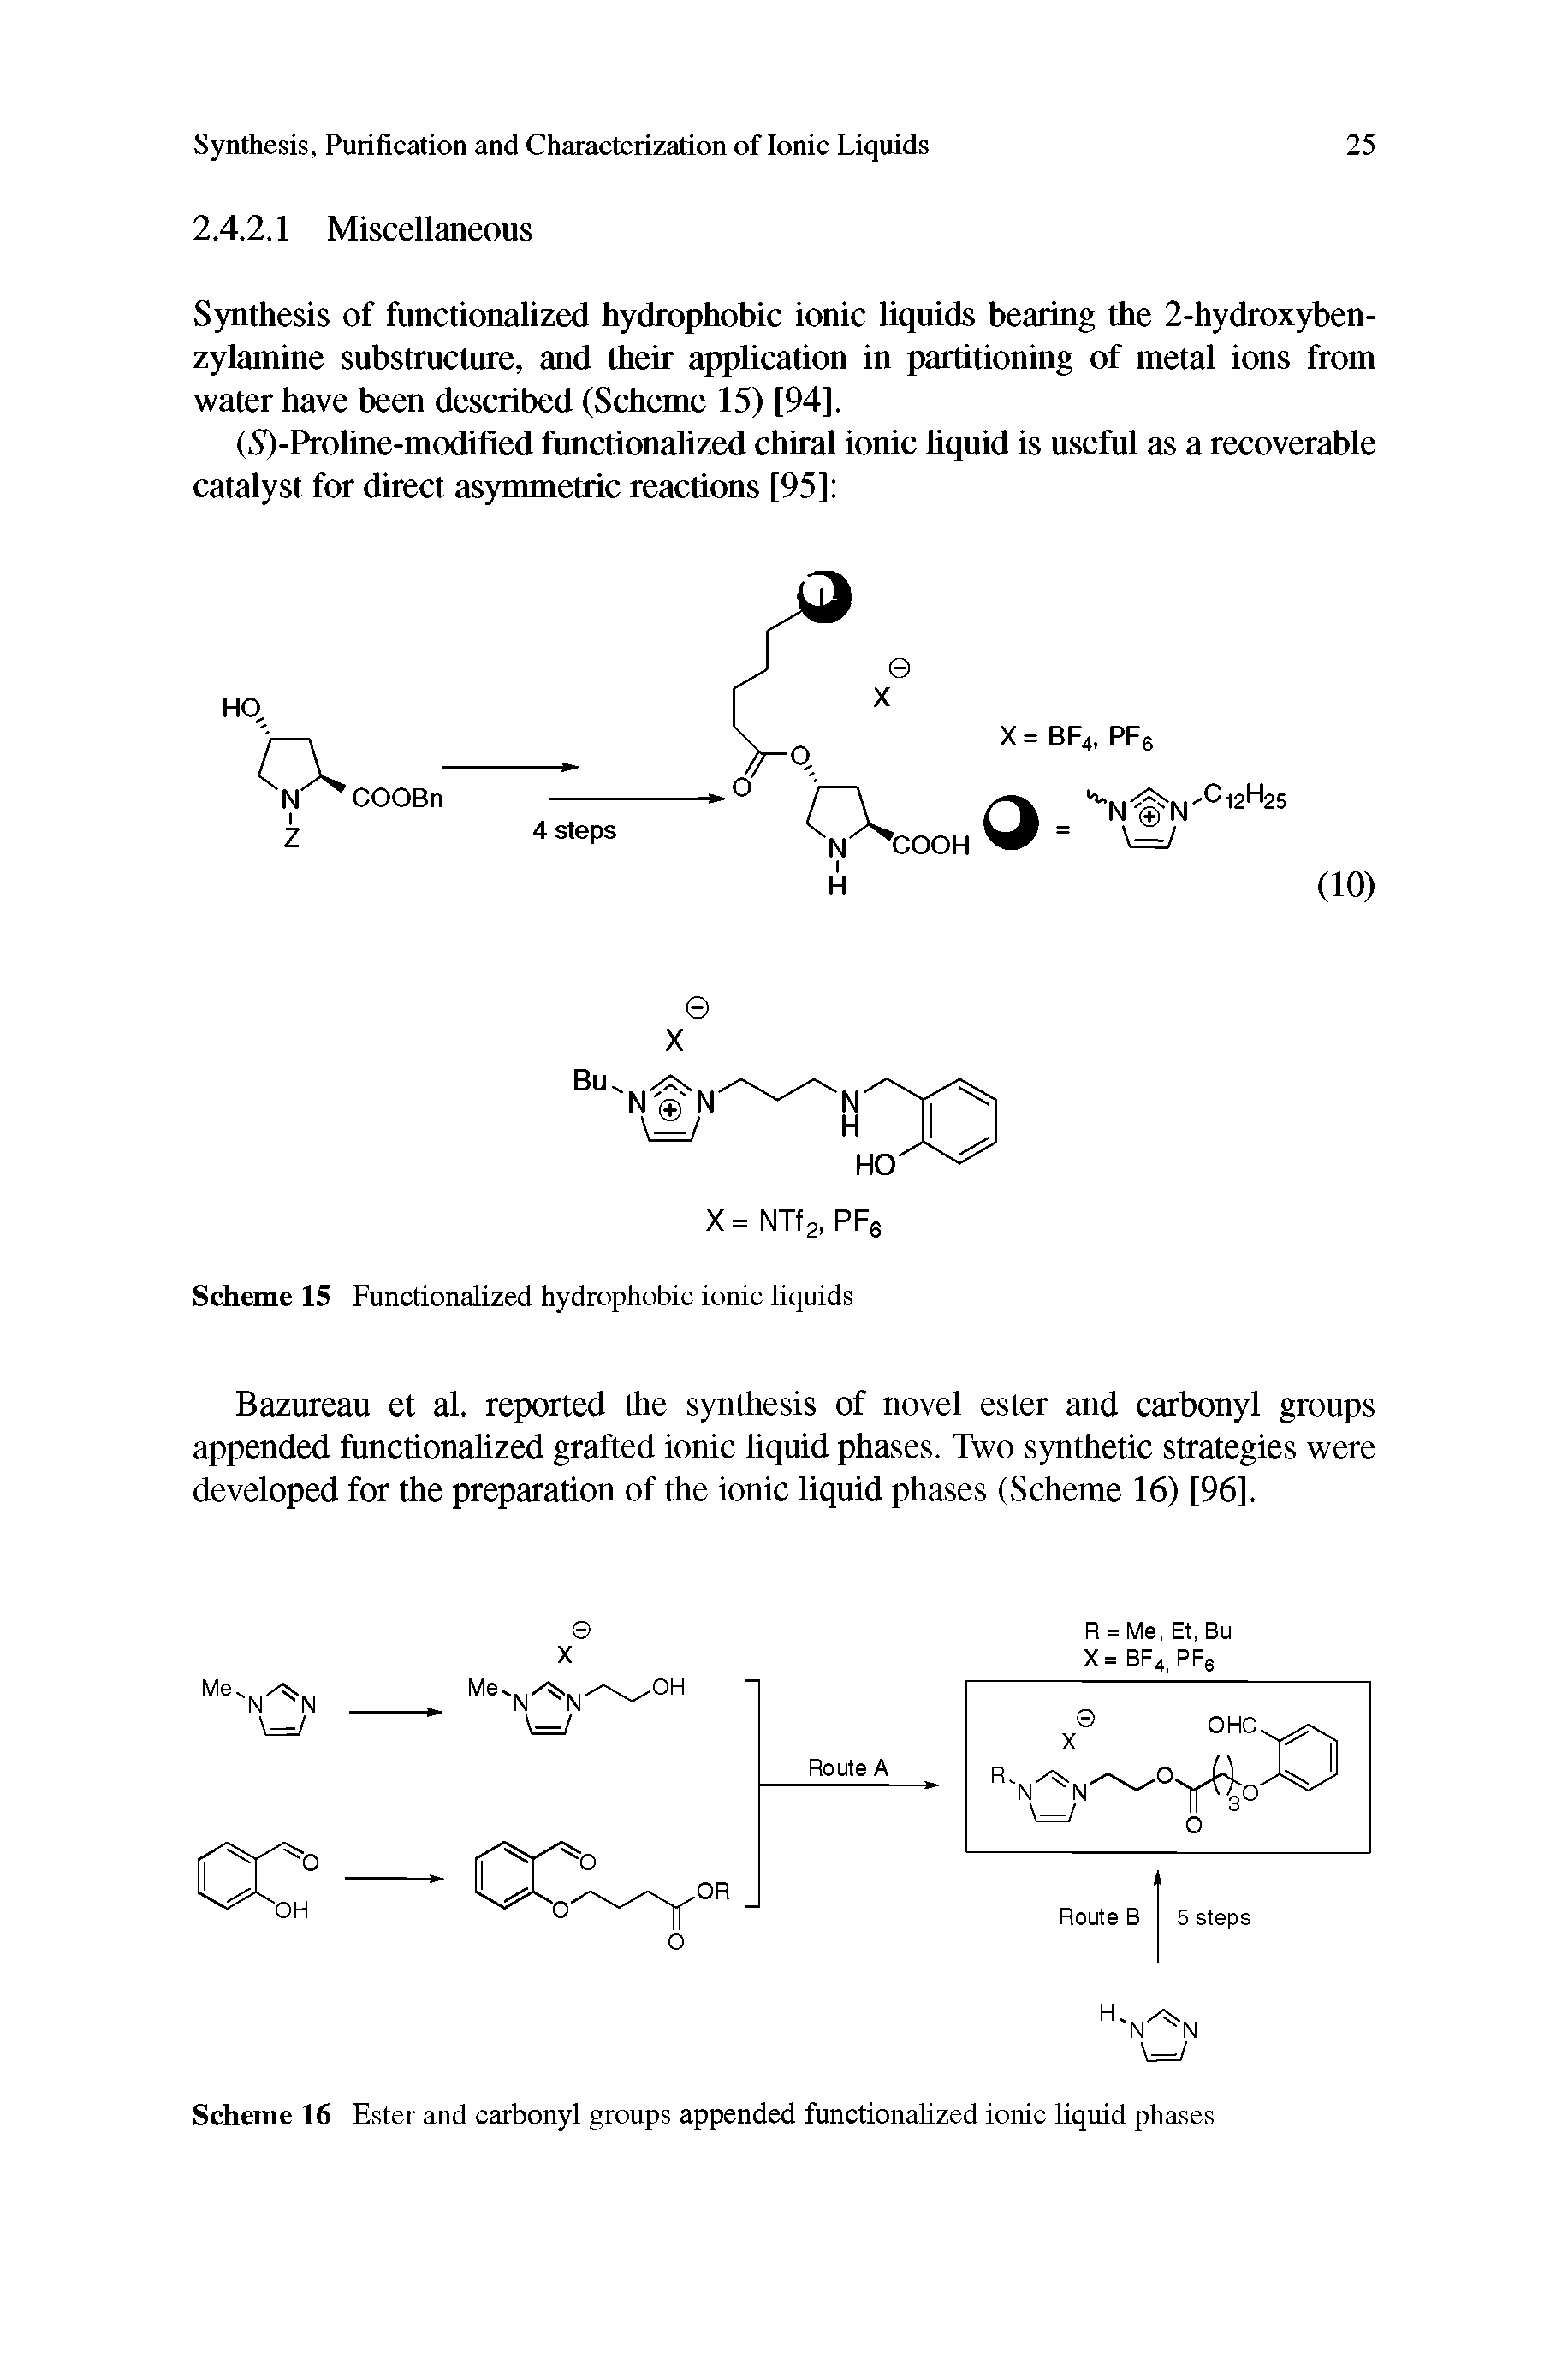 Scheme 16 Ester and carbonyl groups appended functionalized ionic liquid phases...